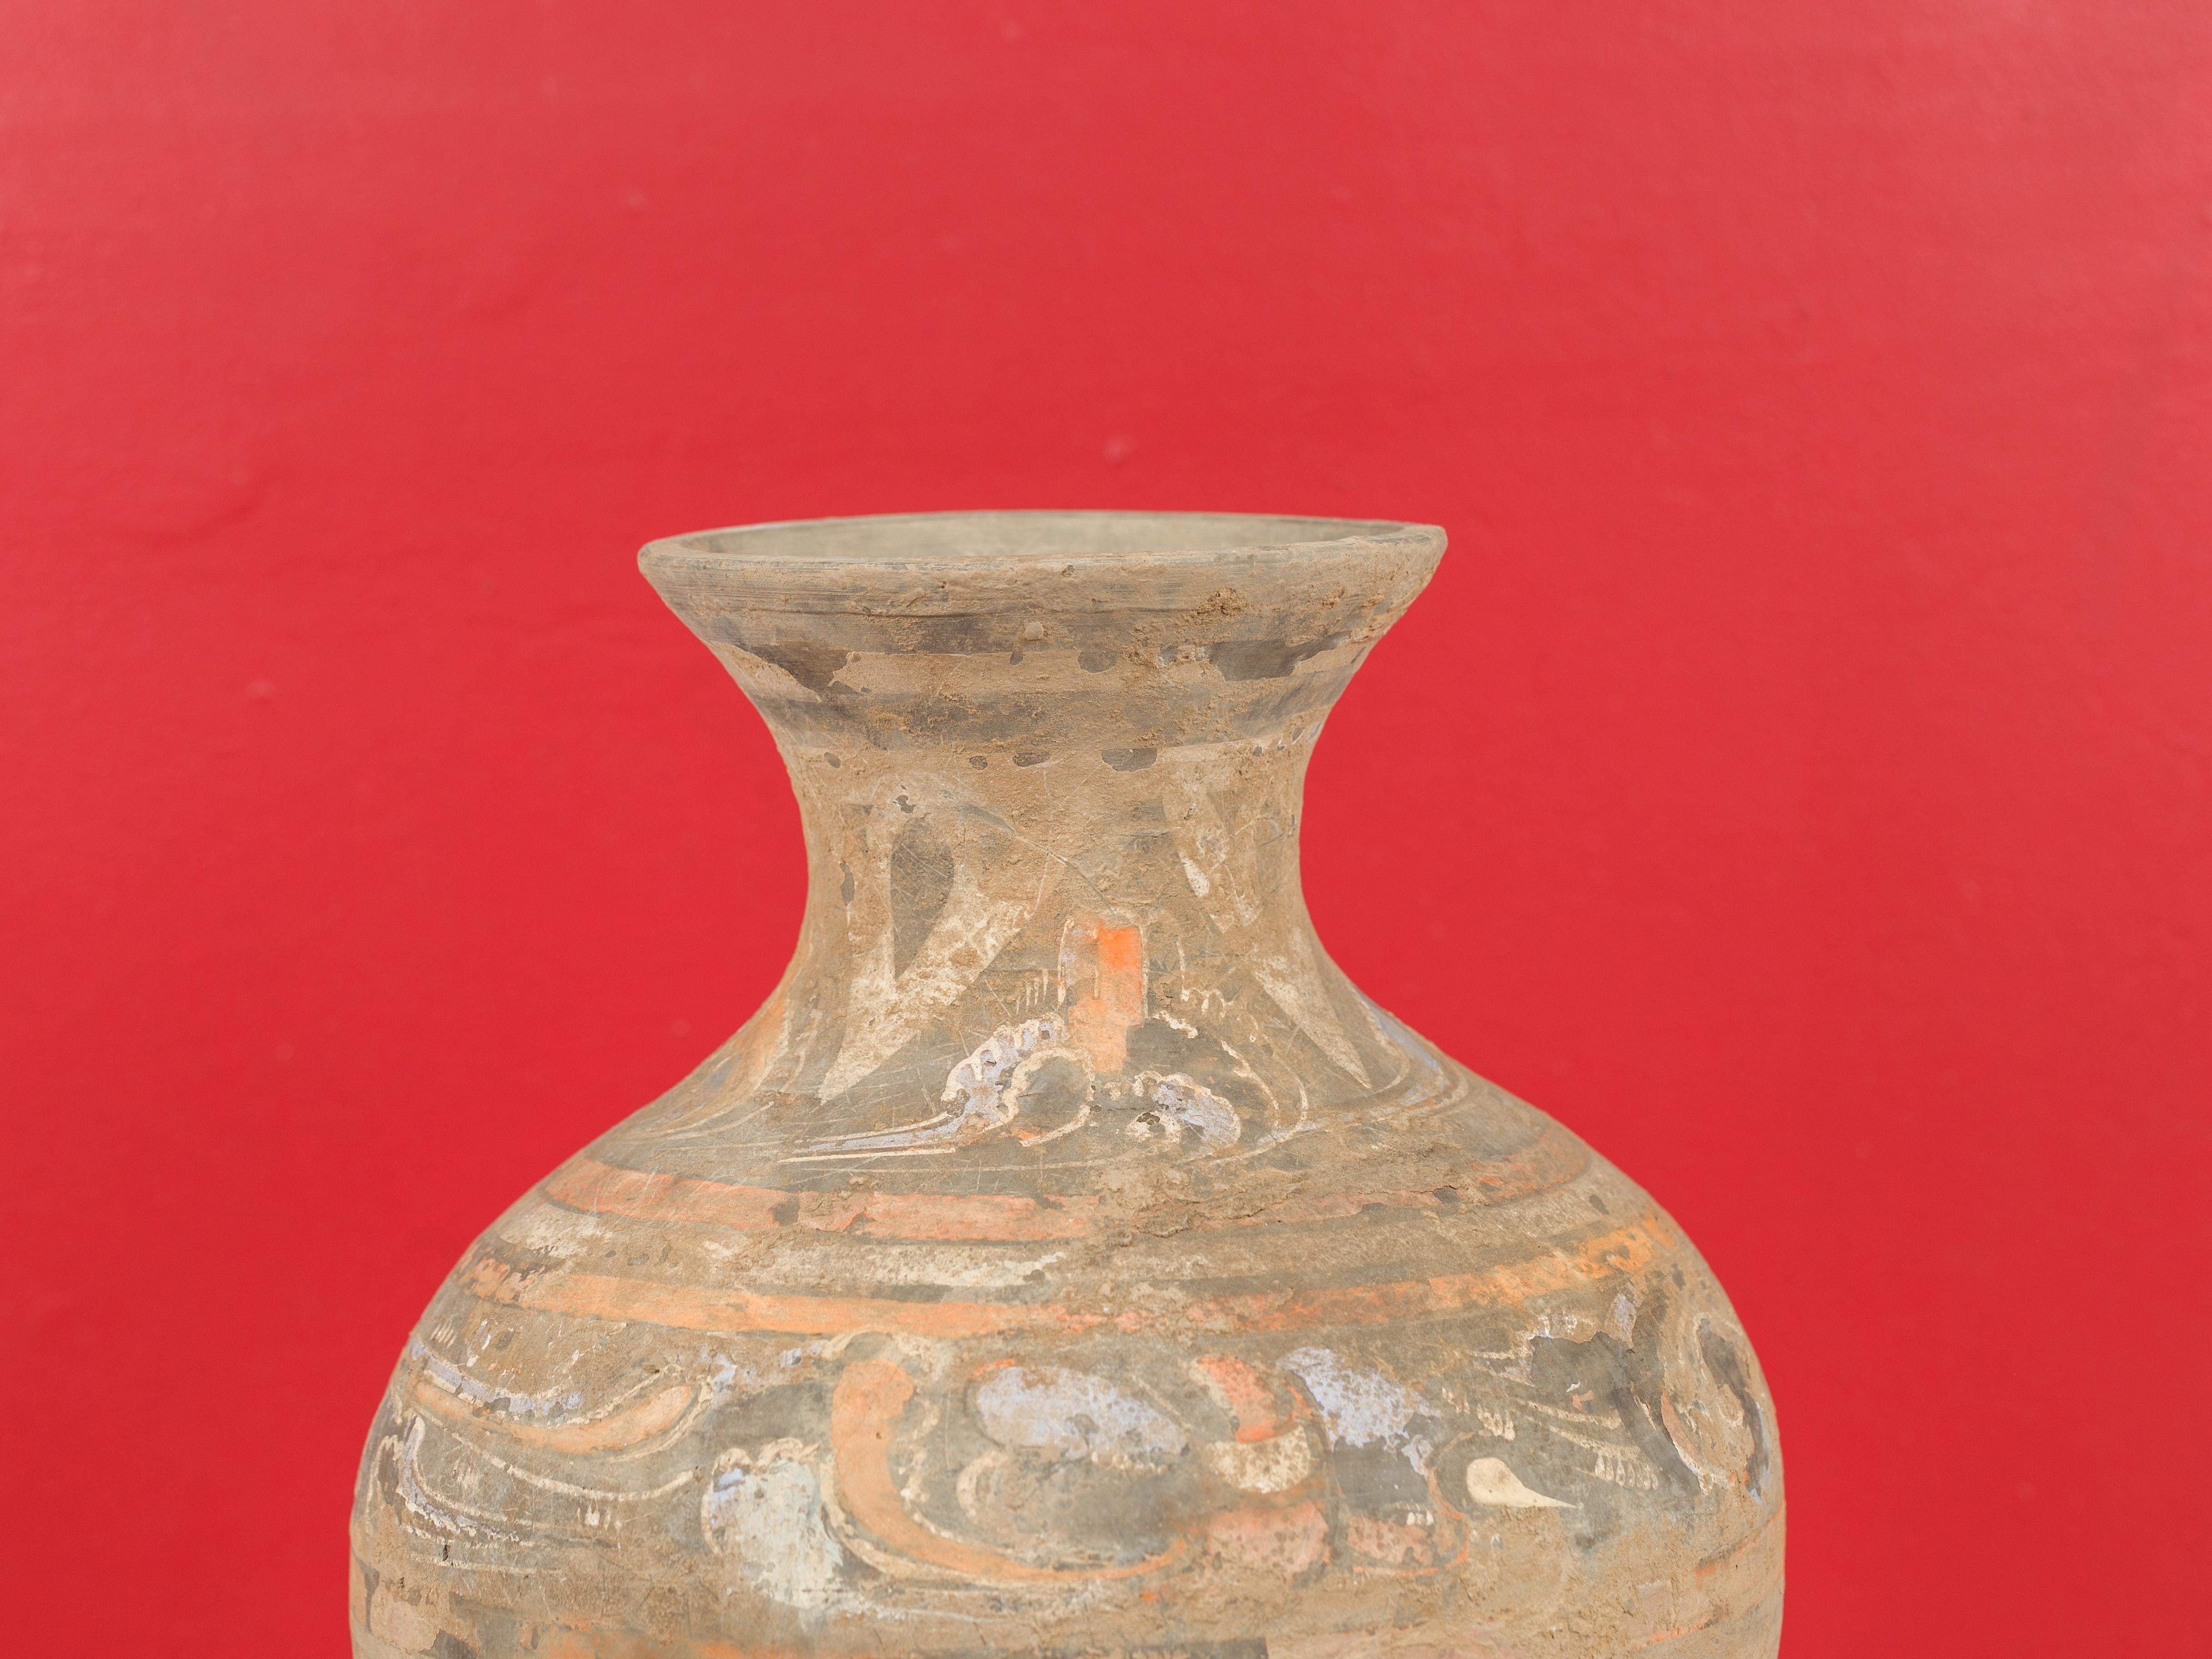 18th Century and Earlier Chinese Han Dynasty Terracotta Hu Vessel with Original Paint circa 202 BC-200 AD